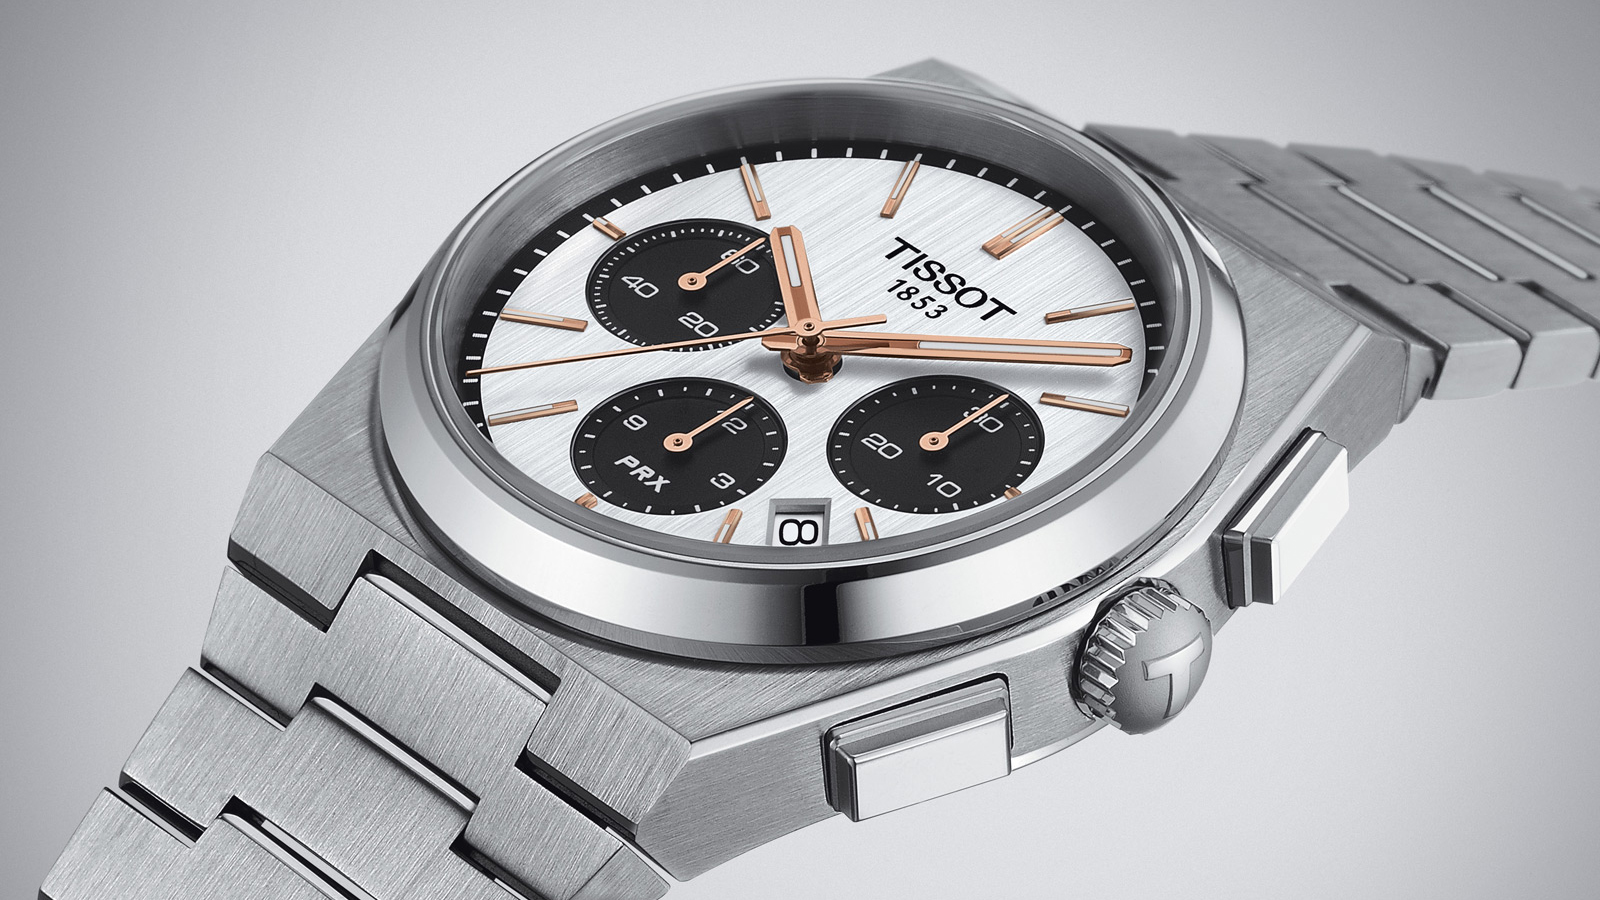 The Tissot PRX Chronograph Is This Year's Hype Watch So Far